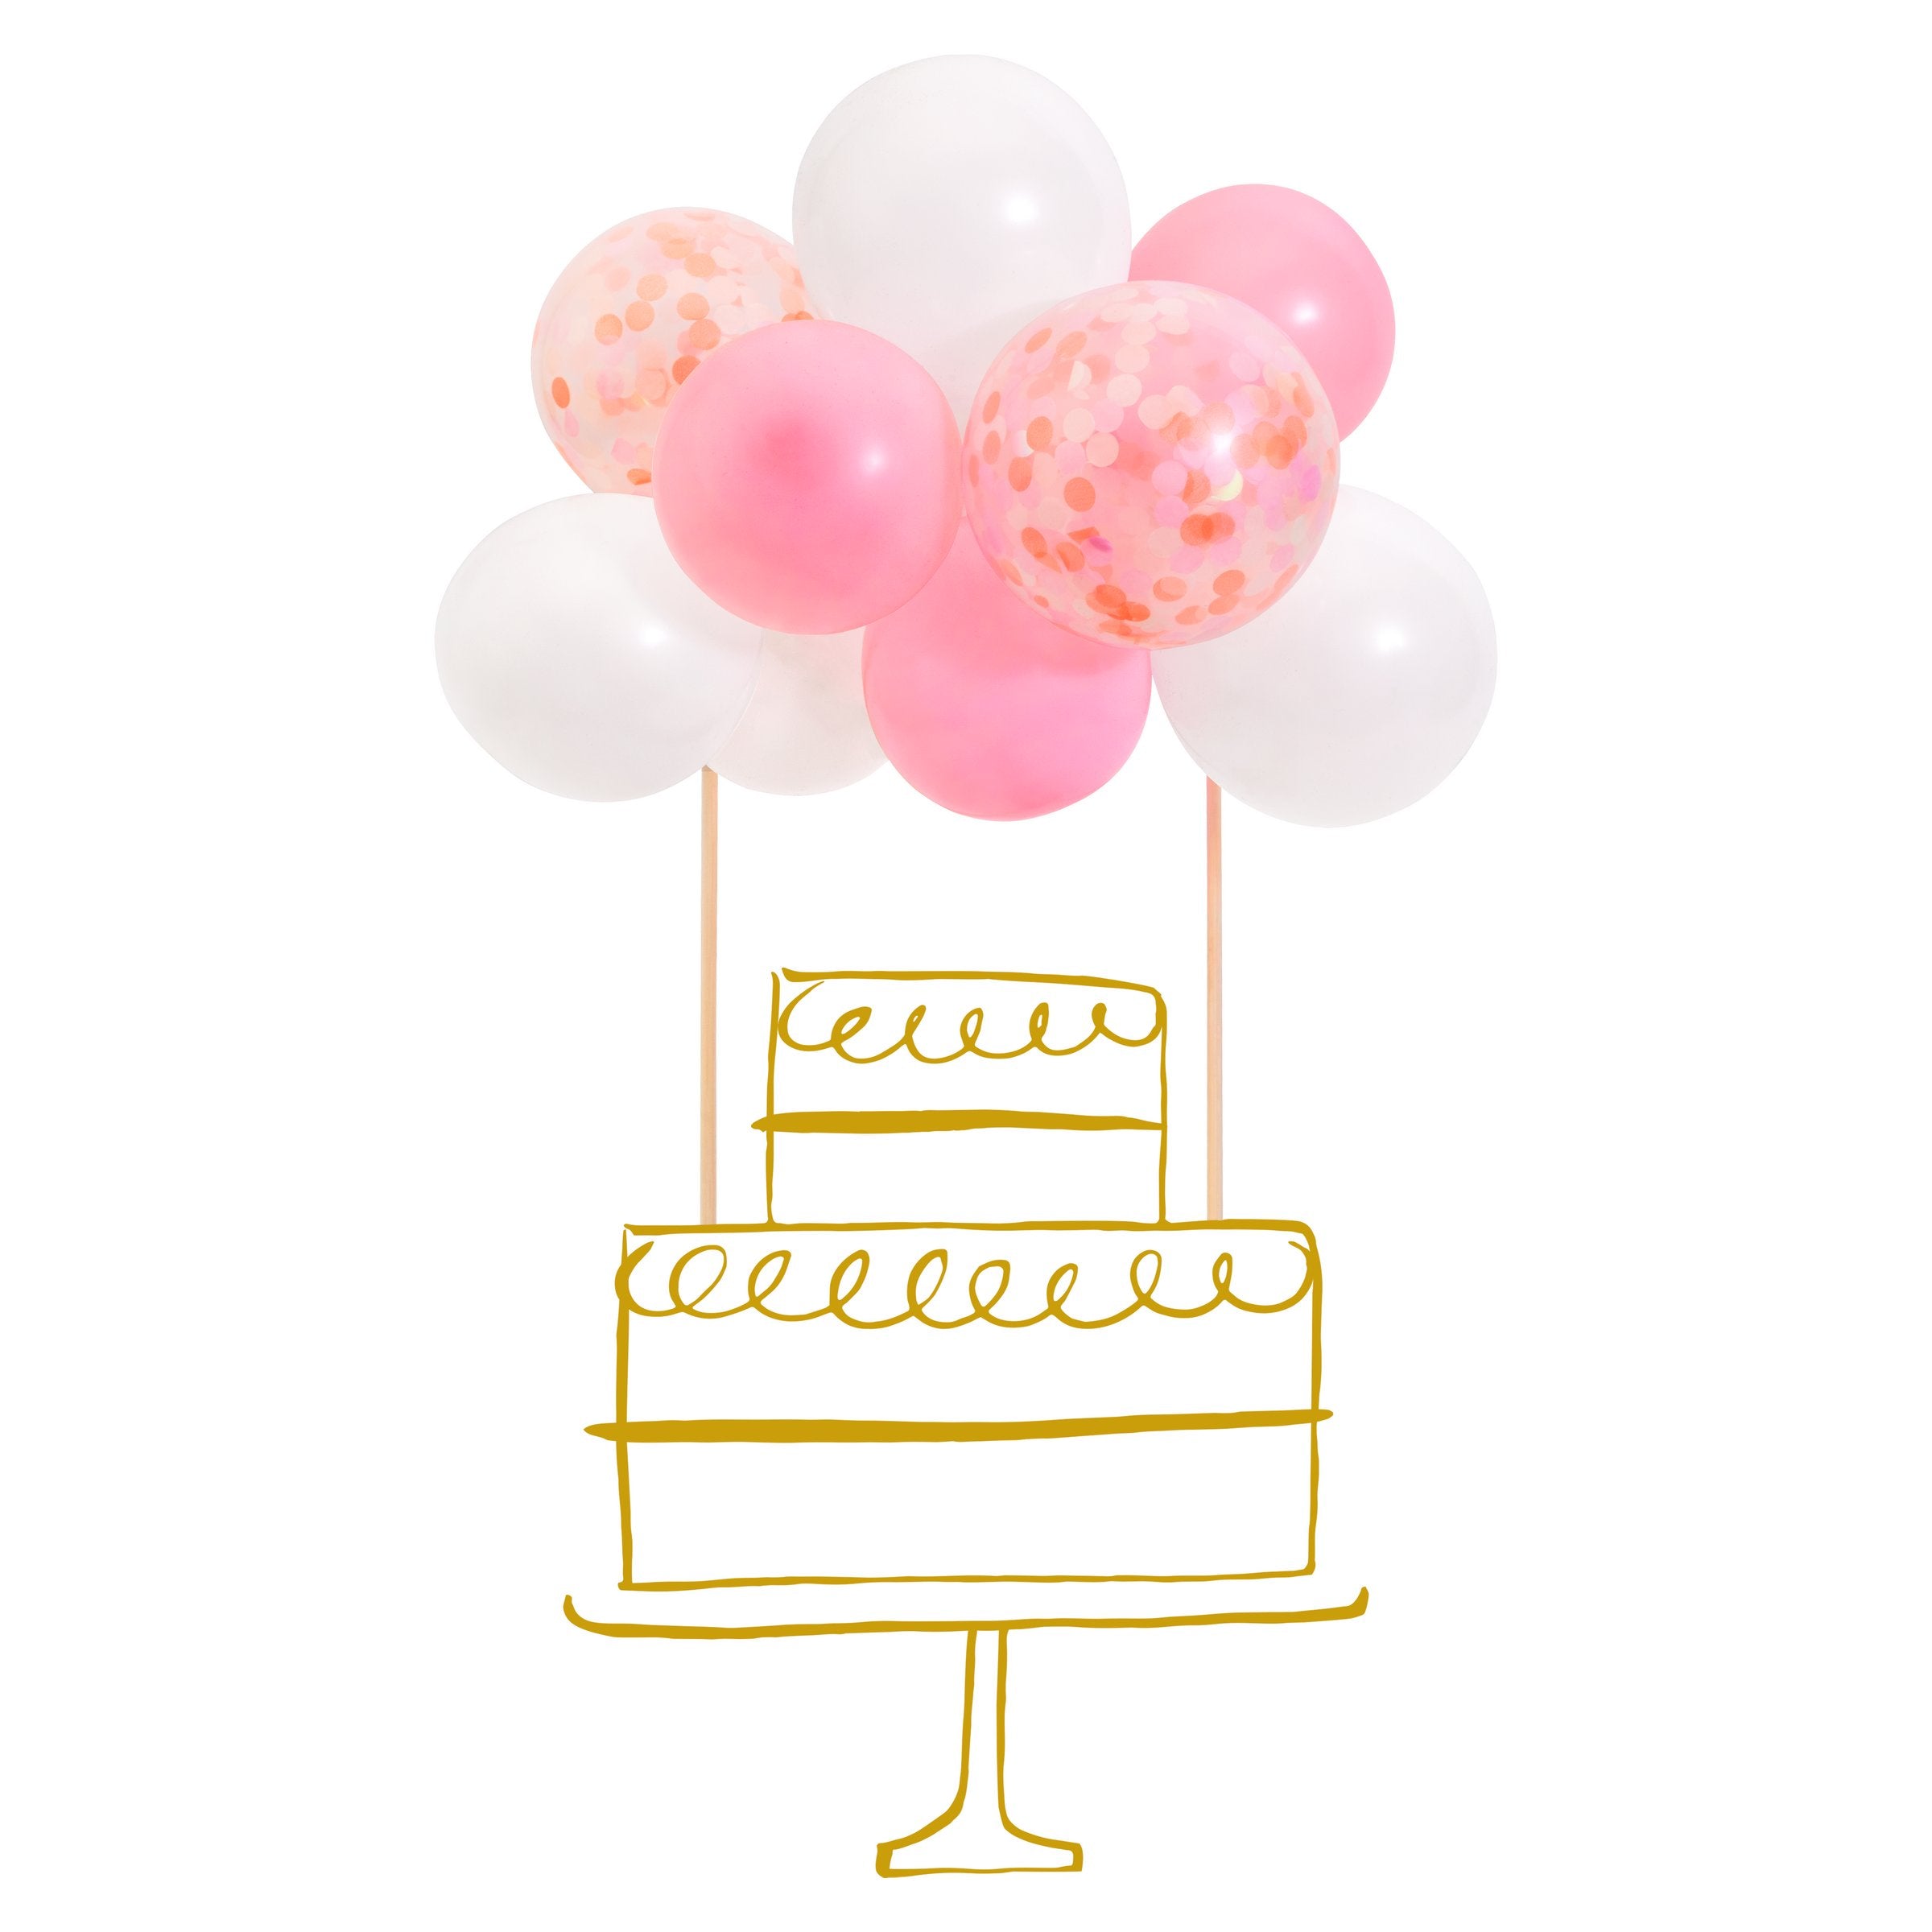 Use our cake toppers, with pink balloons, to make a birthday cake look amazing.